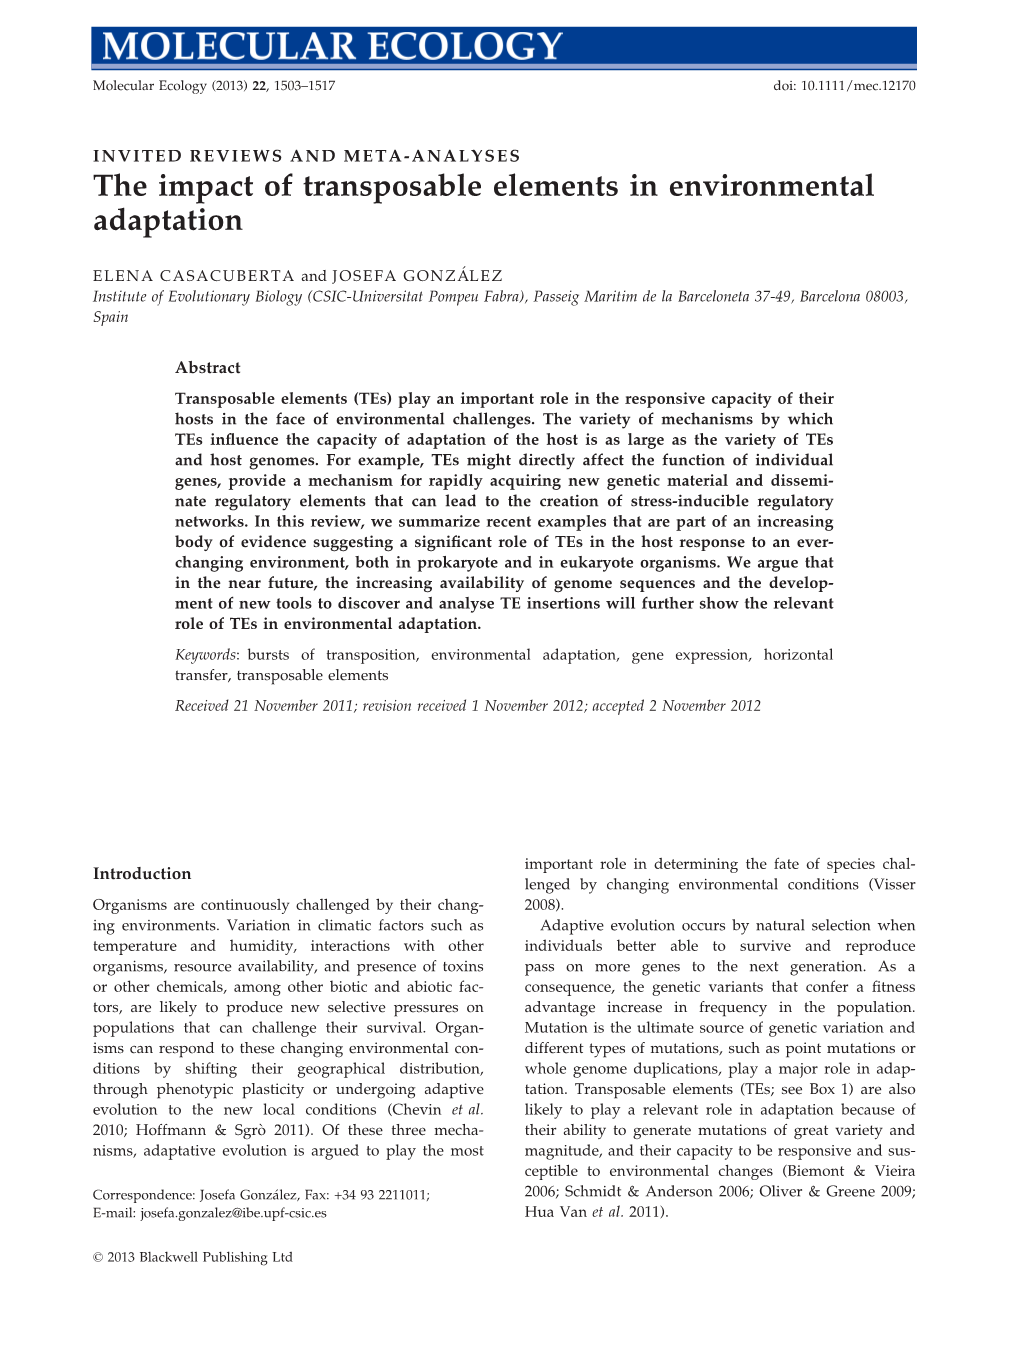 The Impact of Transposable Elements in Environmental Adaptation